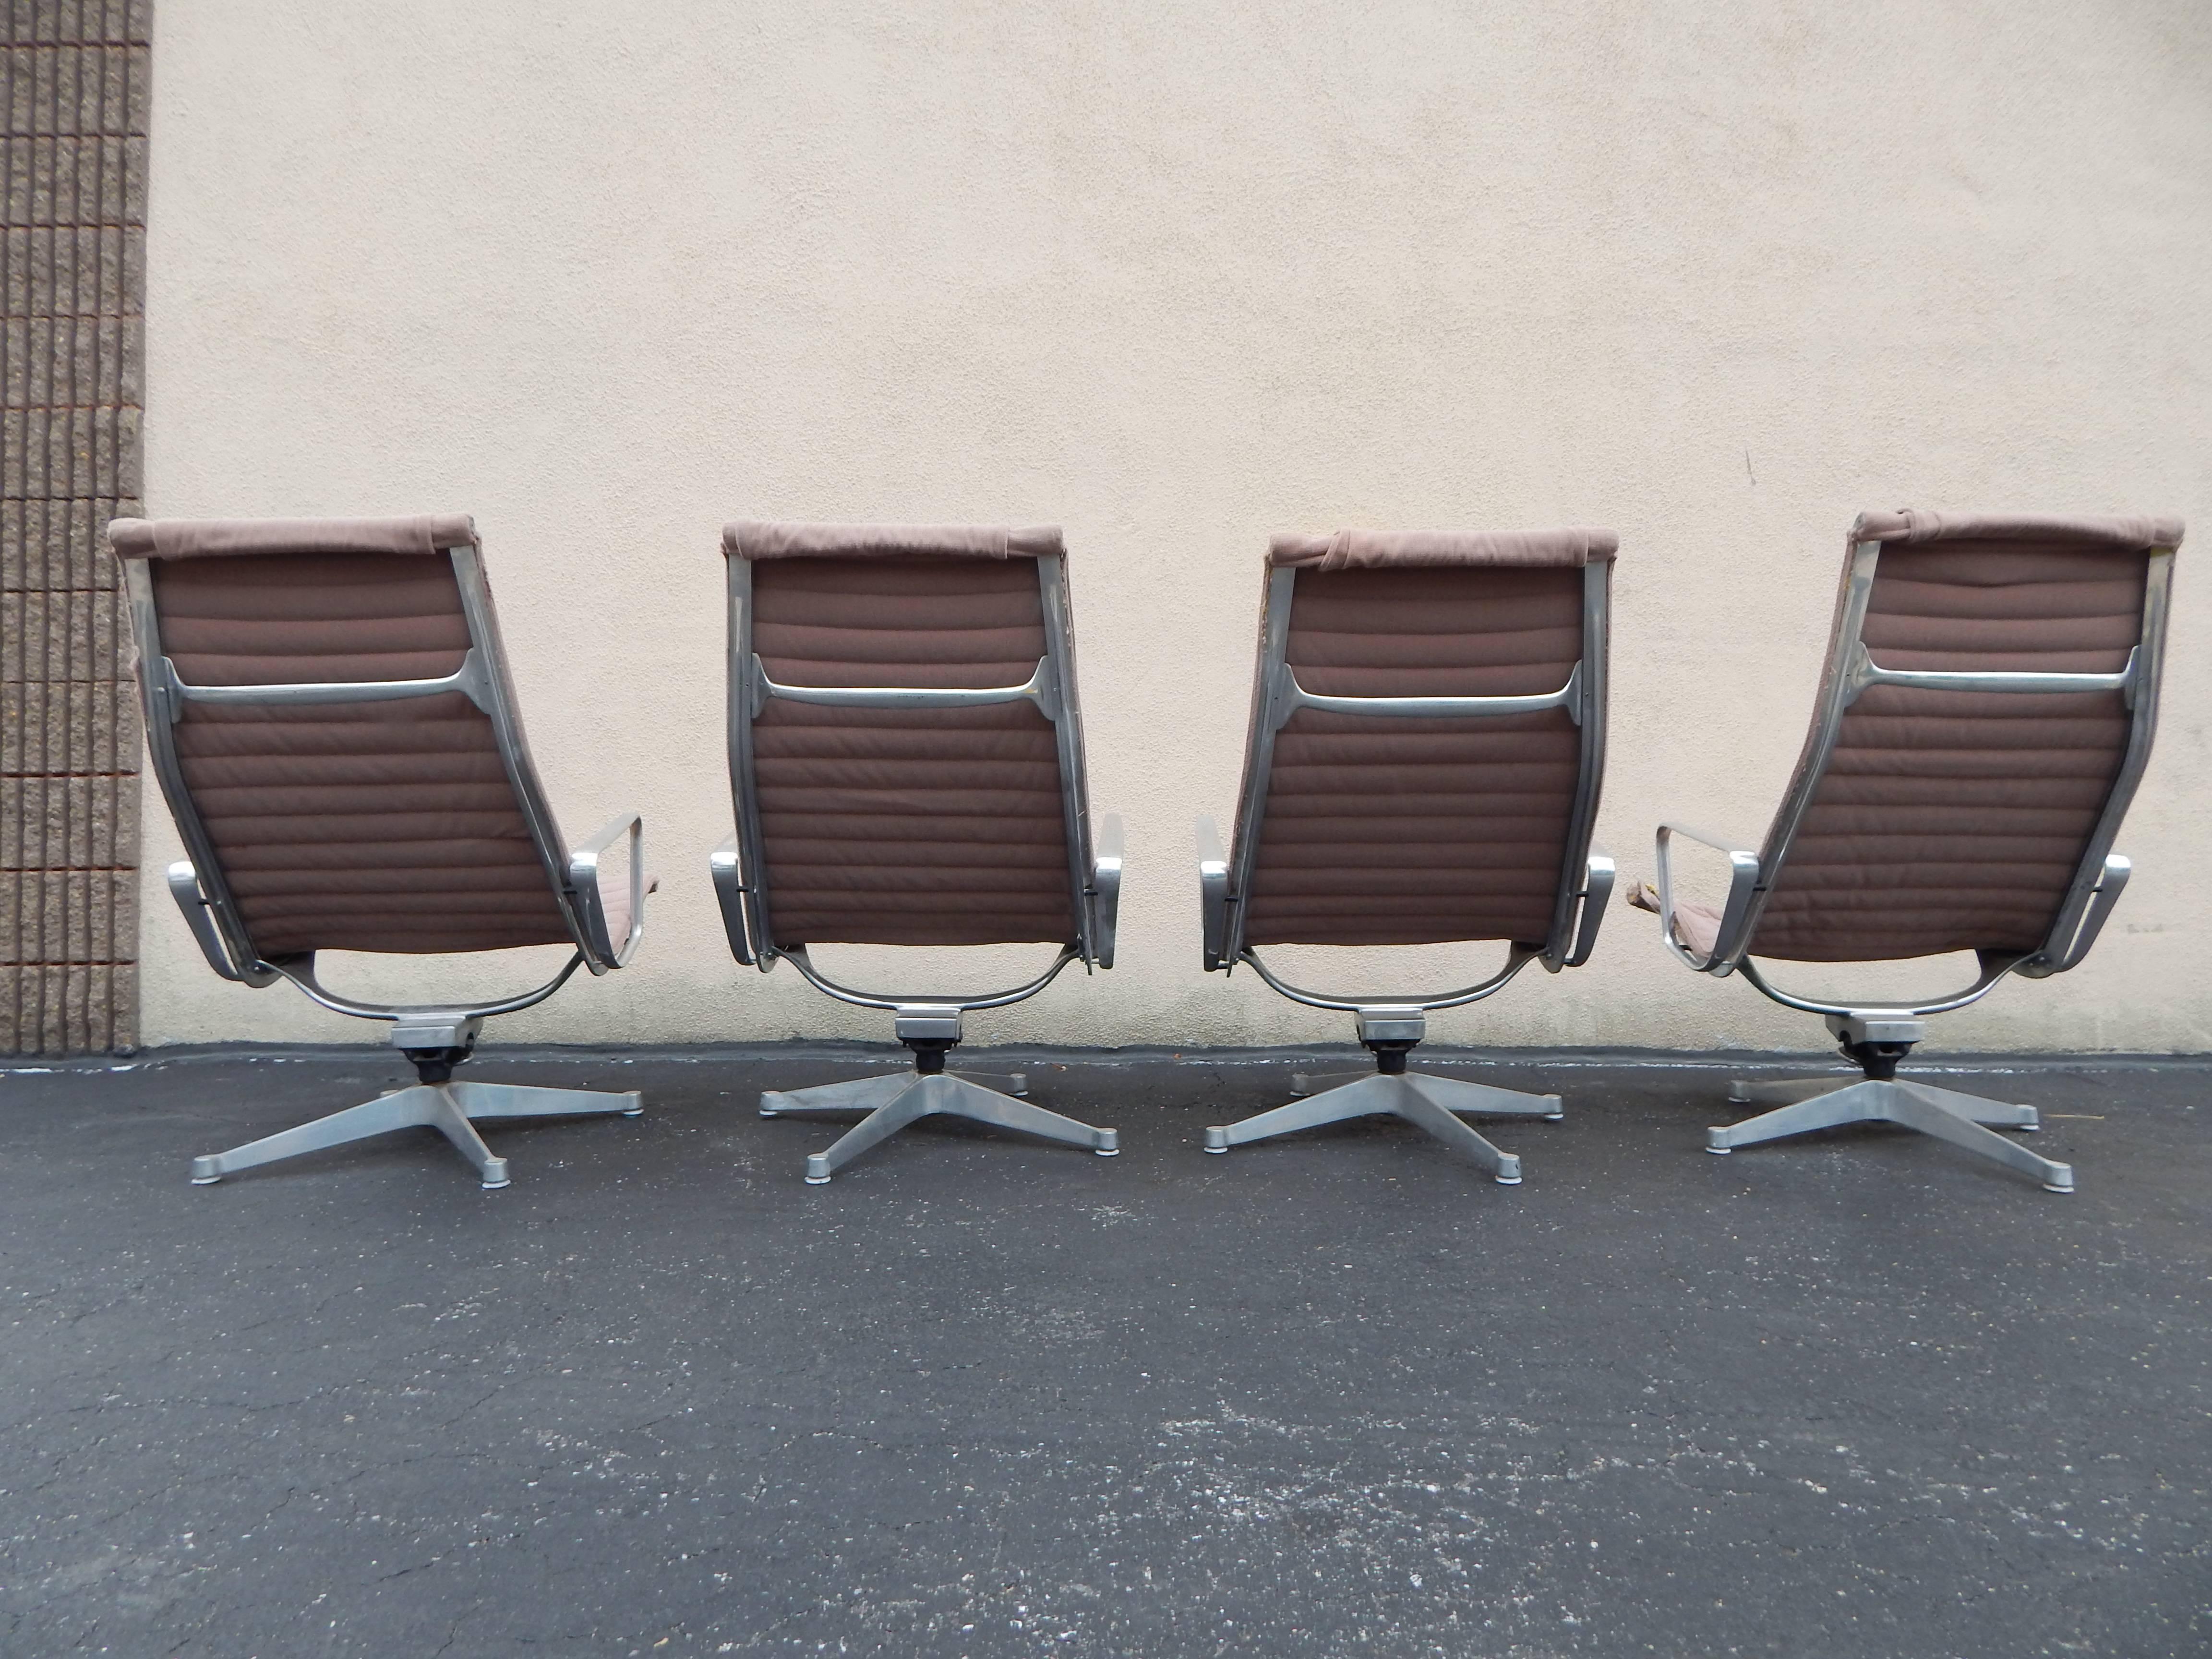 Early model 1970s Eames designed for Herman Miller Lounge or Lounger chairs. Price is for the entire group of 4. All chairs are in need of new upholstery. All chairs are in excellent operating and functioning condition. All swivel with ease. Steel